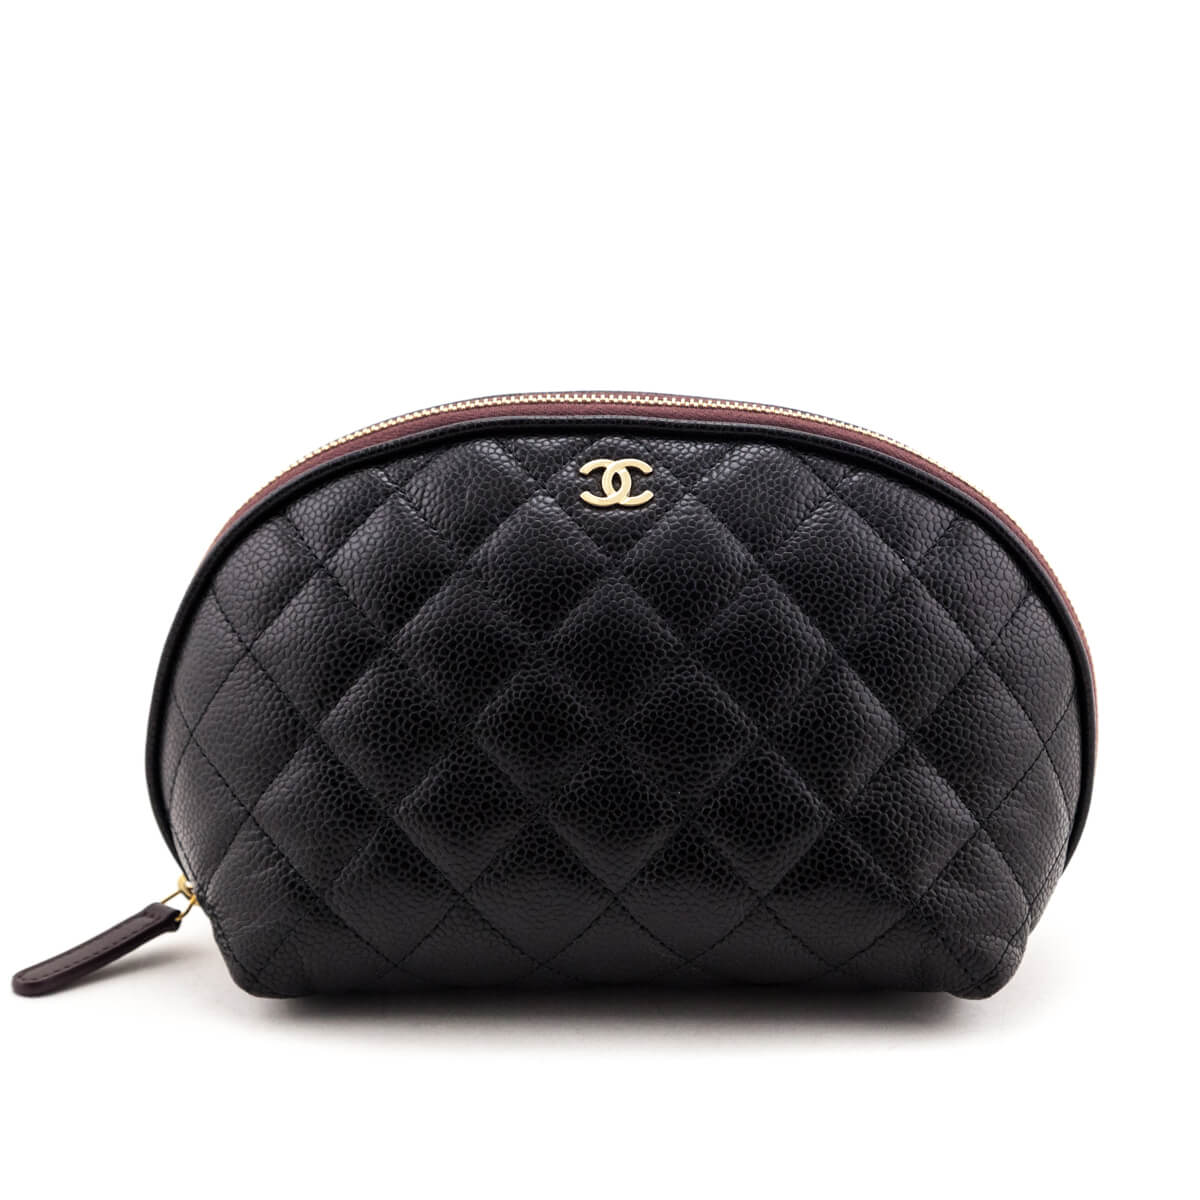 Chanel Black Caviar Small Curvy Cosmetic Case - Love that Bag etc - Preowned Authentic Designer Handbags & Preloved Fashions